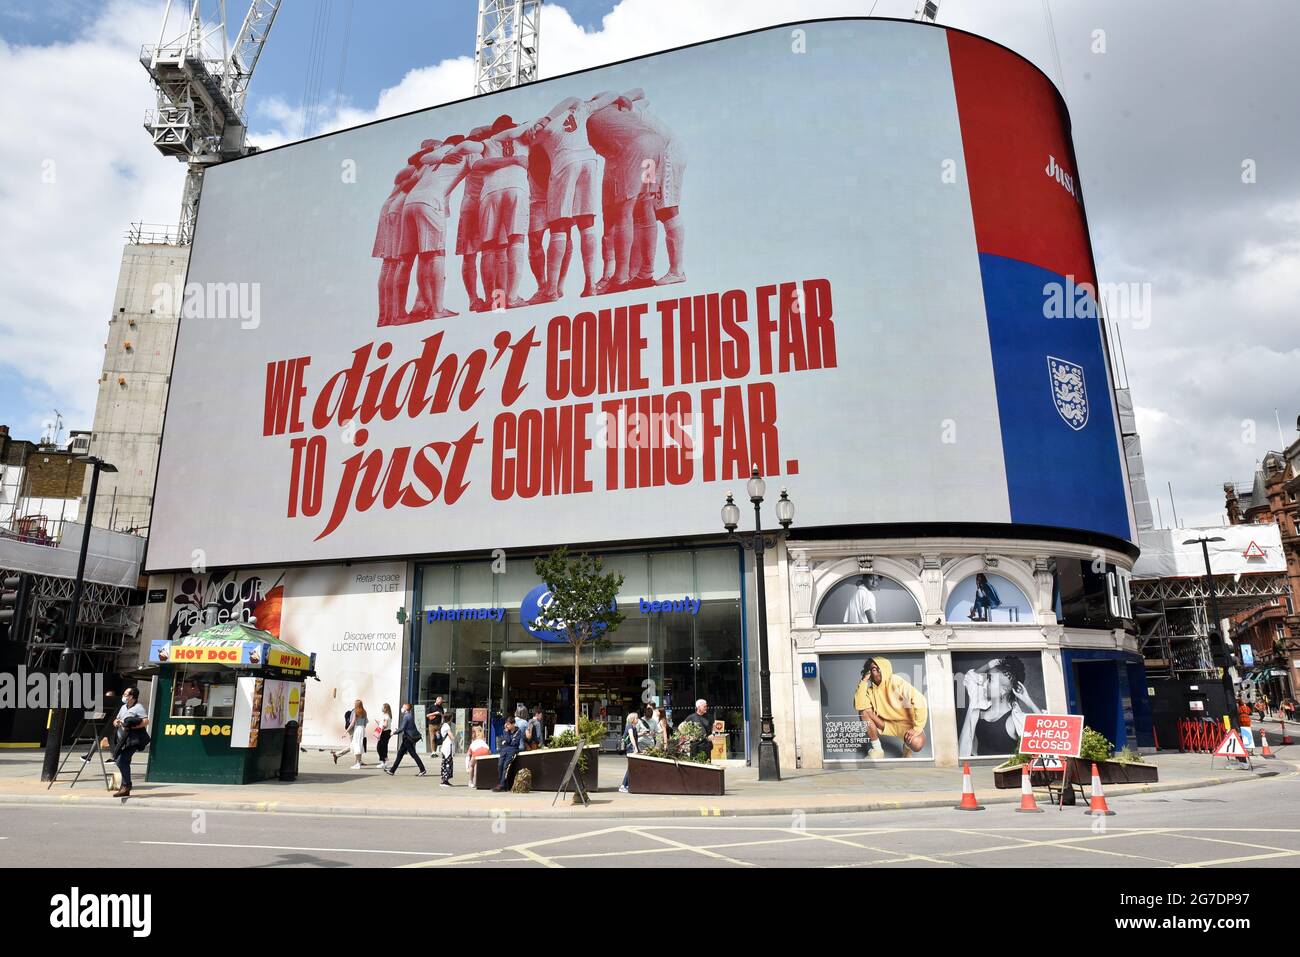 George Stevenson Pagar tributo Acostado Piccadilly Circus, London, UK. 13th July 2021. A NIKE advert in Piccadilly  Circus celebrates England at the UEFA EURO 2020. Credit: Matthew  Chattle/Alamy Live News Stock Photo - Alamy